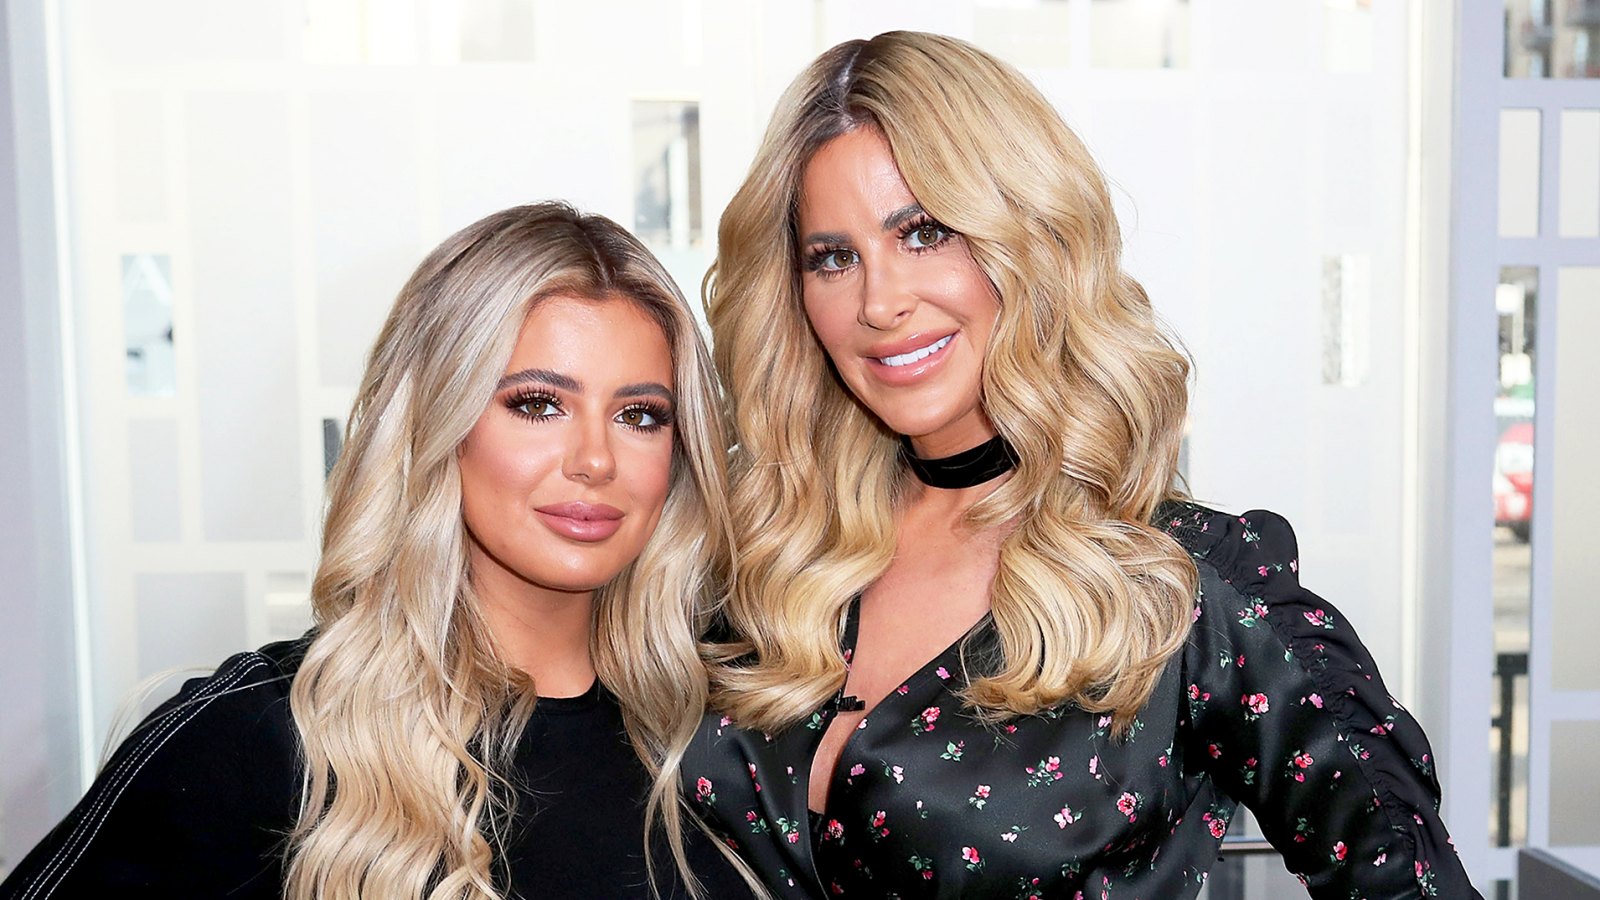 Kim Zolciak and Brielle Biermann visit Hollywood Today Live at W Hollywood on October 13, 2016 in Hollywood, California.